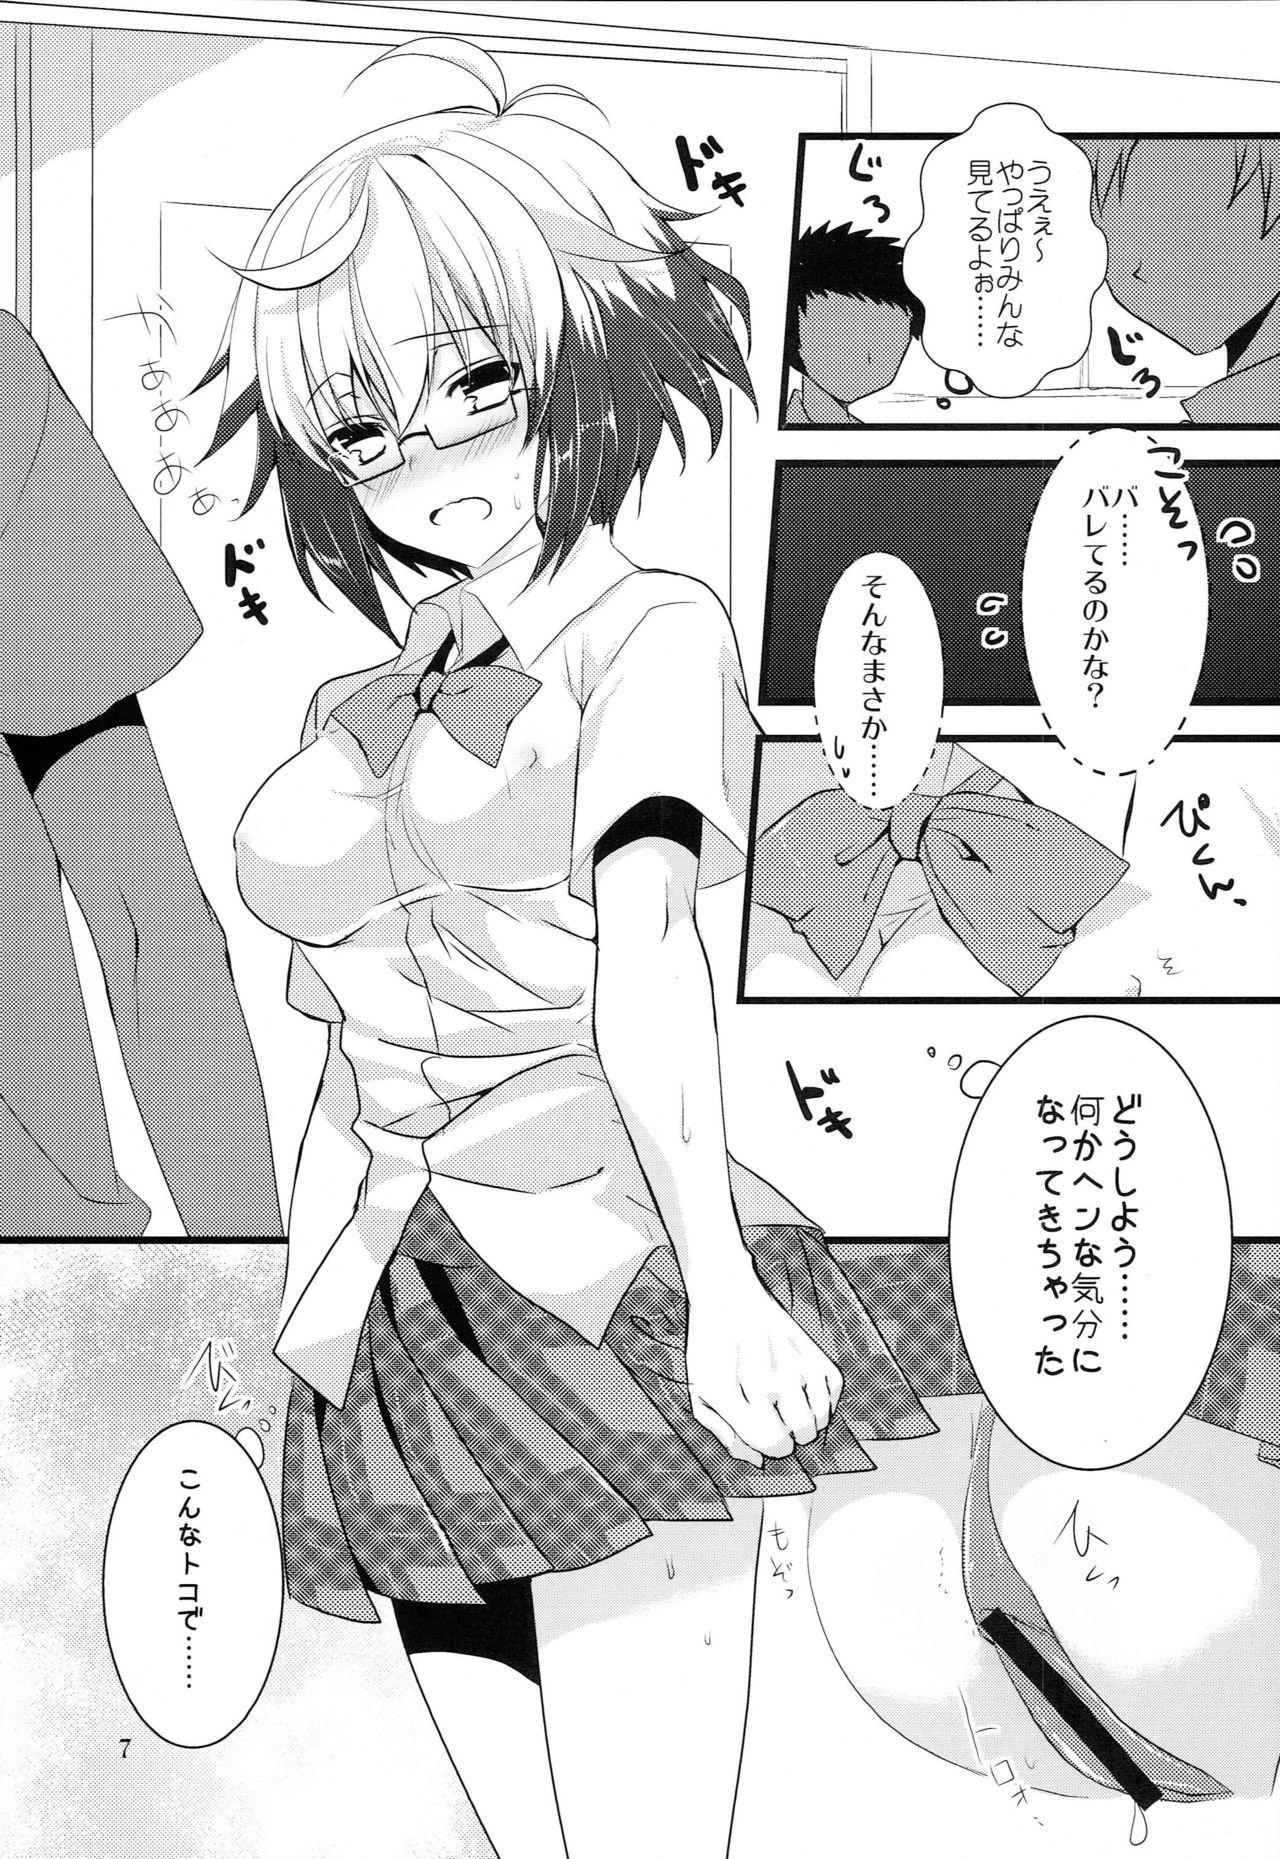 Pov Blow Job Seifuku Resistance - Tales of graces Gay Straight - Page 6